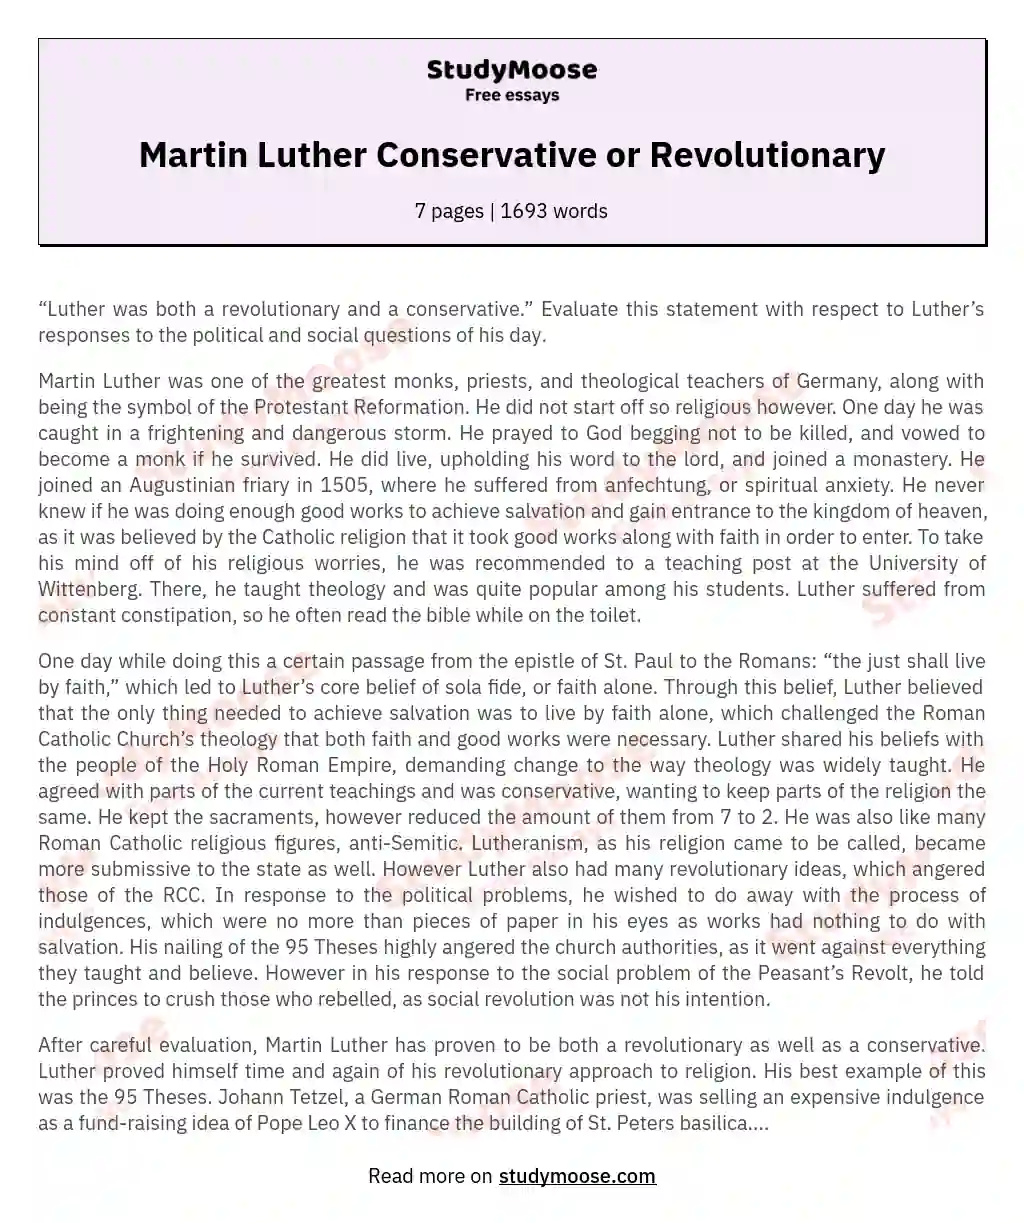 Martin Luther Conservative or Revolutionary